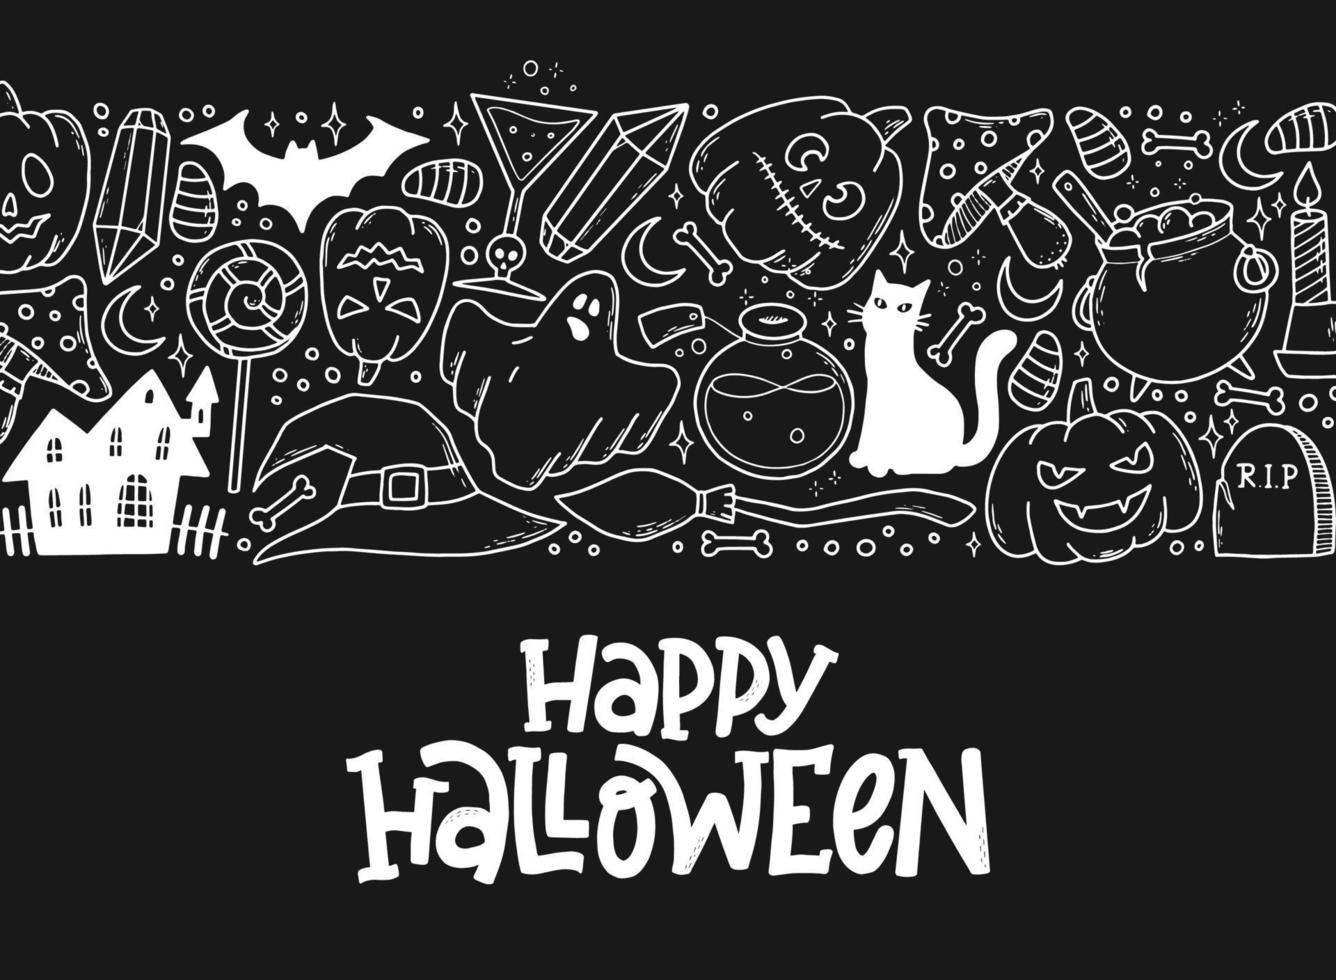 Halloween lettering quote decorated with border of doodles on black background. Good for posters, prints, cards, invitations, banners, templates with copy space. EPS 10 vector